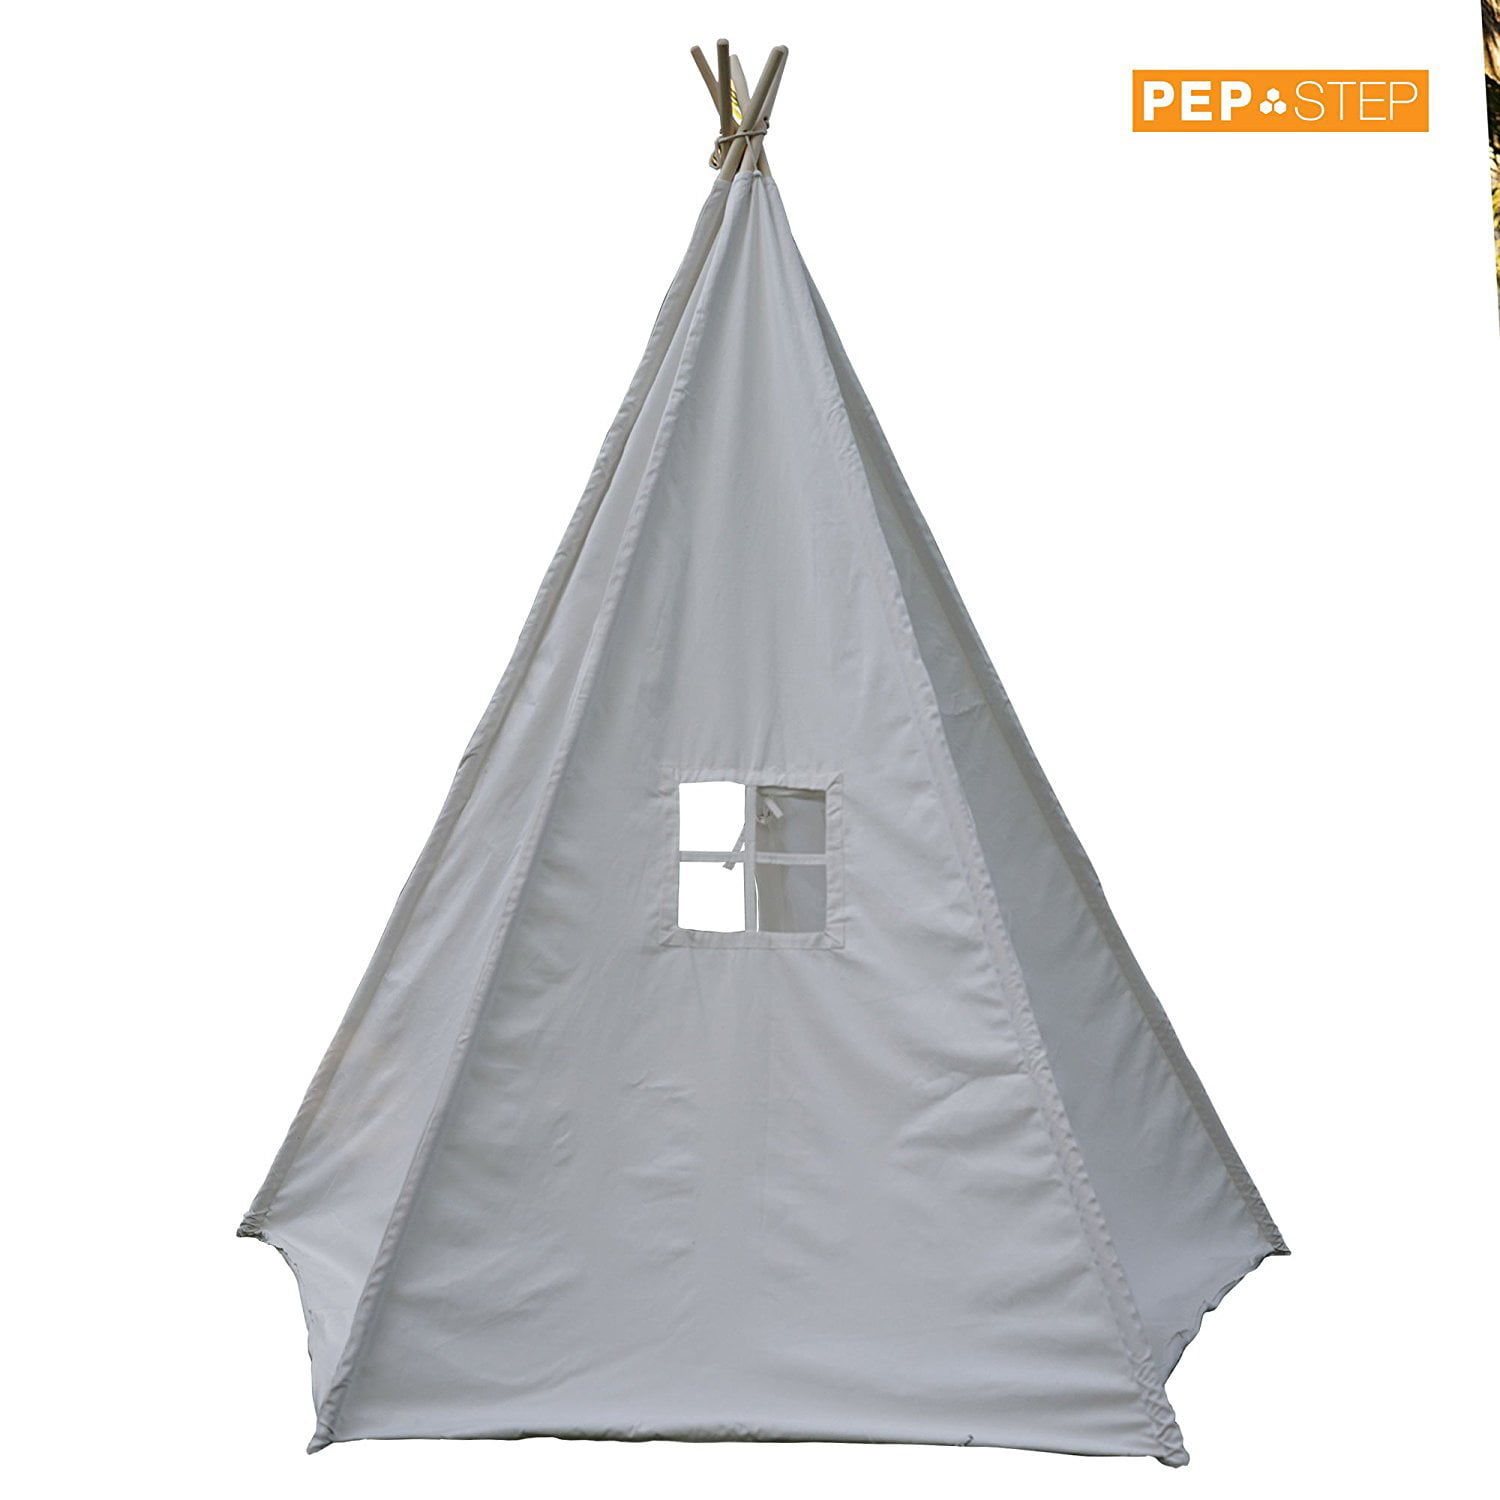 Maakte zich klaar Vergelding voorraad PEP-STEP Large Cotton Canvas TeePee Tent - Fordable 6 Feet Tall - 5 Poles -  Customizable white Cotton Tent - Childrens TeePee Tent High Quality Kids  Play Tent - Walmart.com